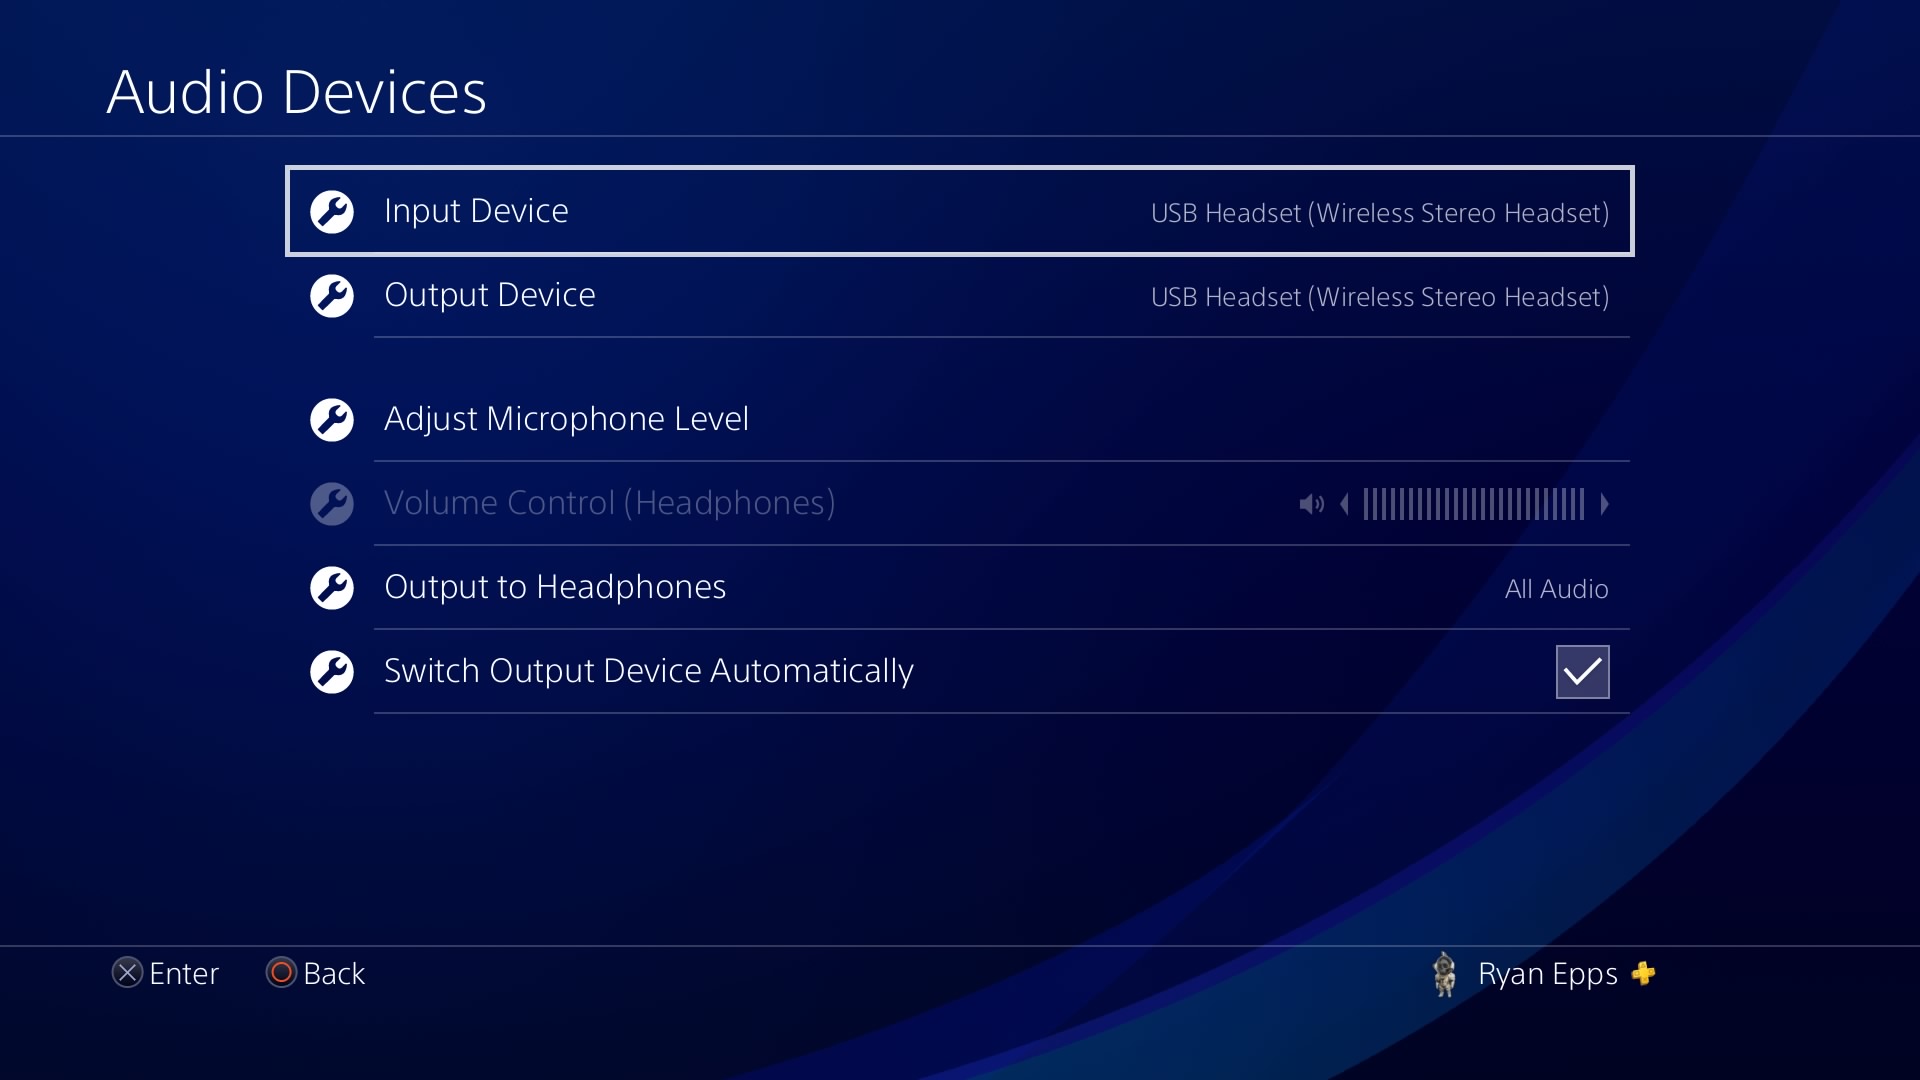 How to connect Bluetooth headphones to a PS4